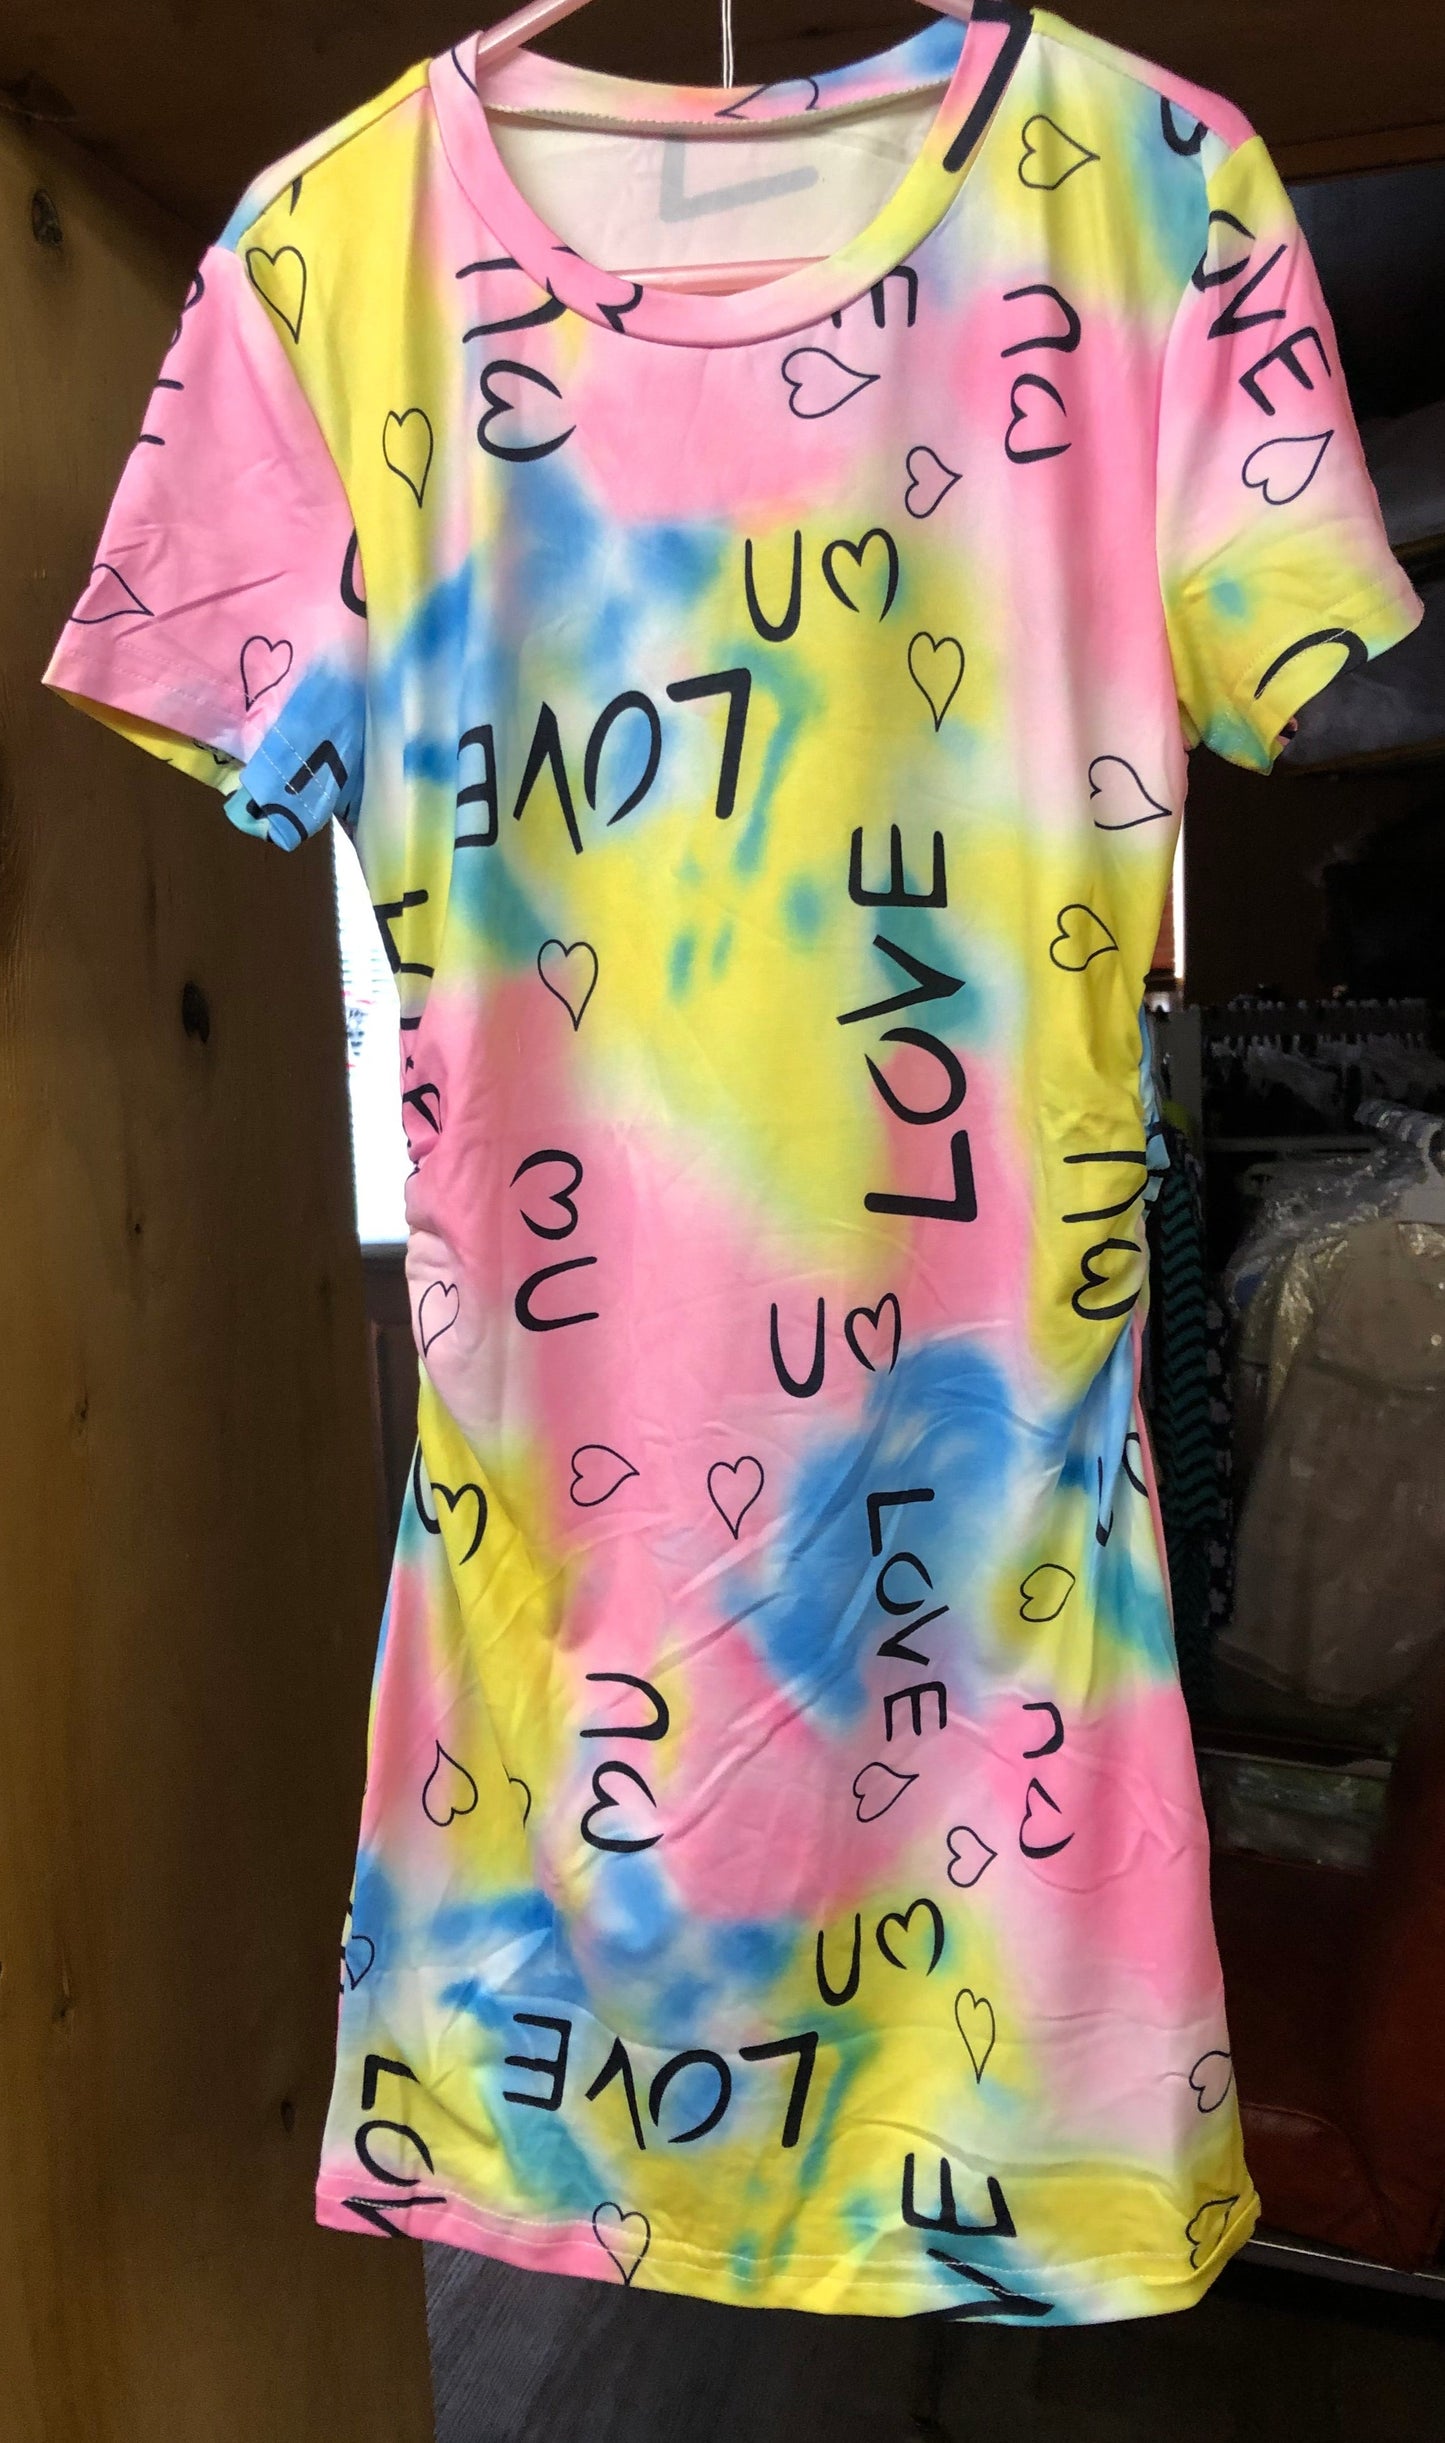 Girls Colorful Rainbow Tie-Dye And Letter Graphic Dress. Size 8 "New Arrival"